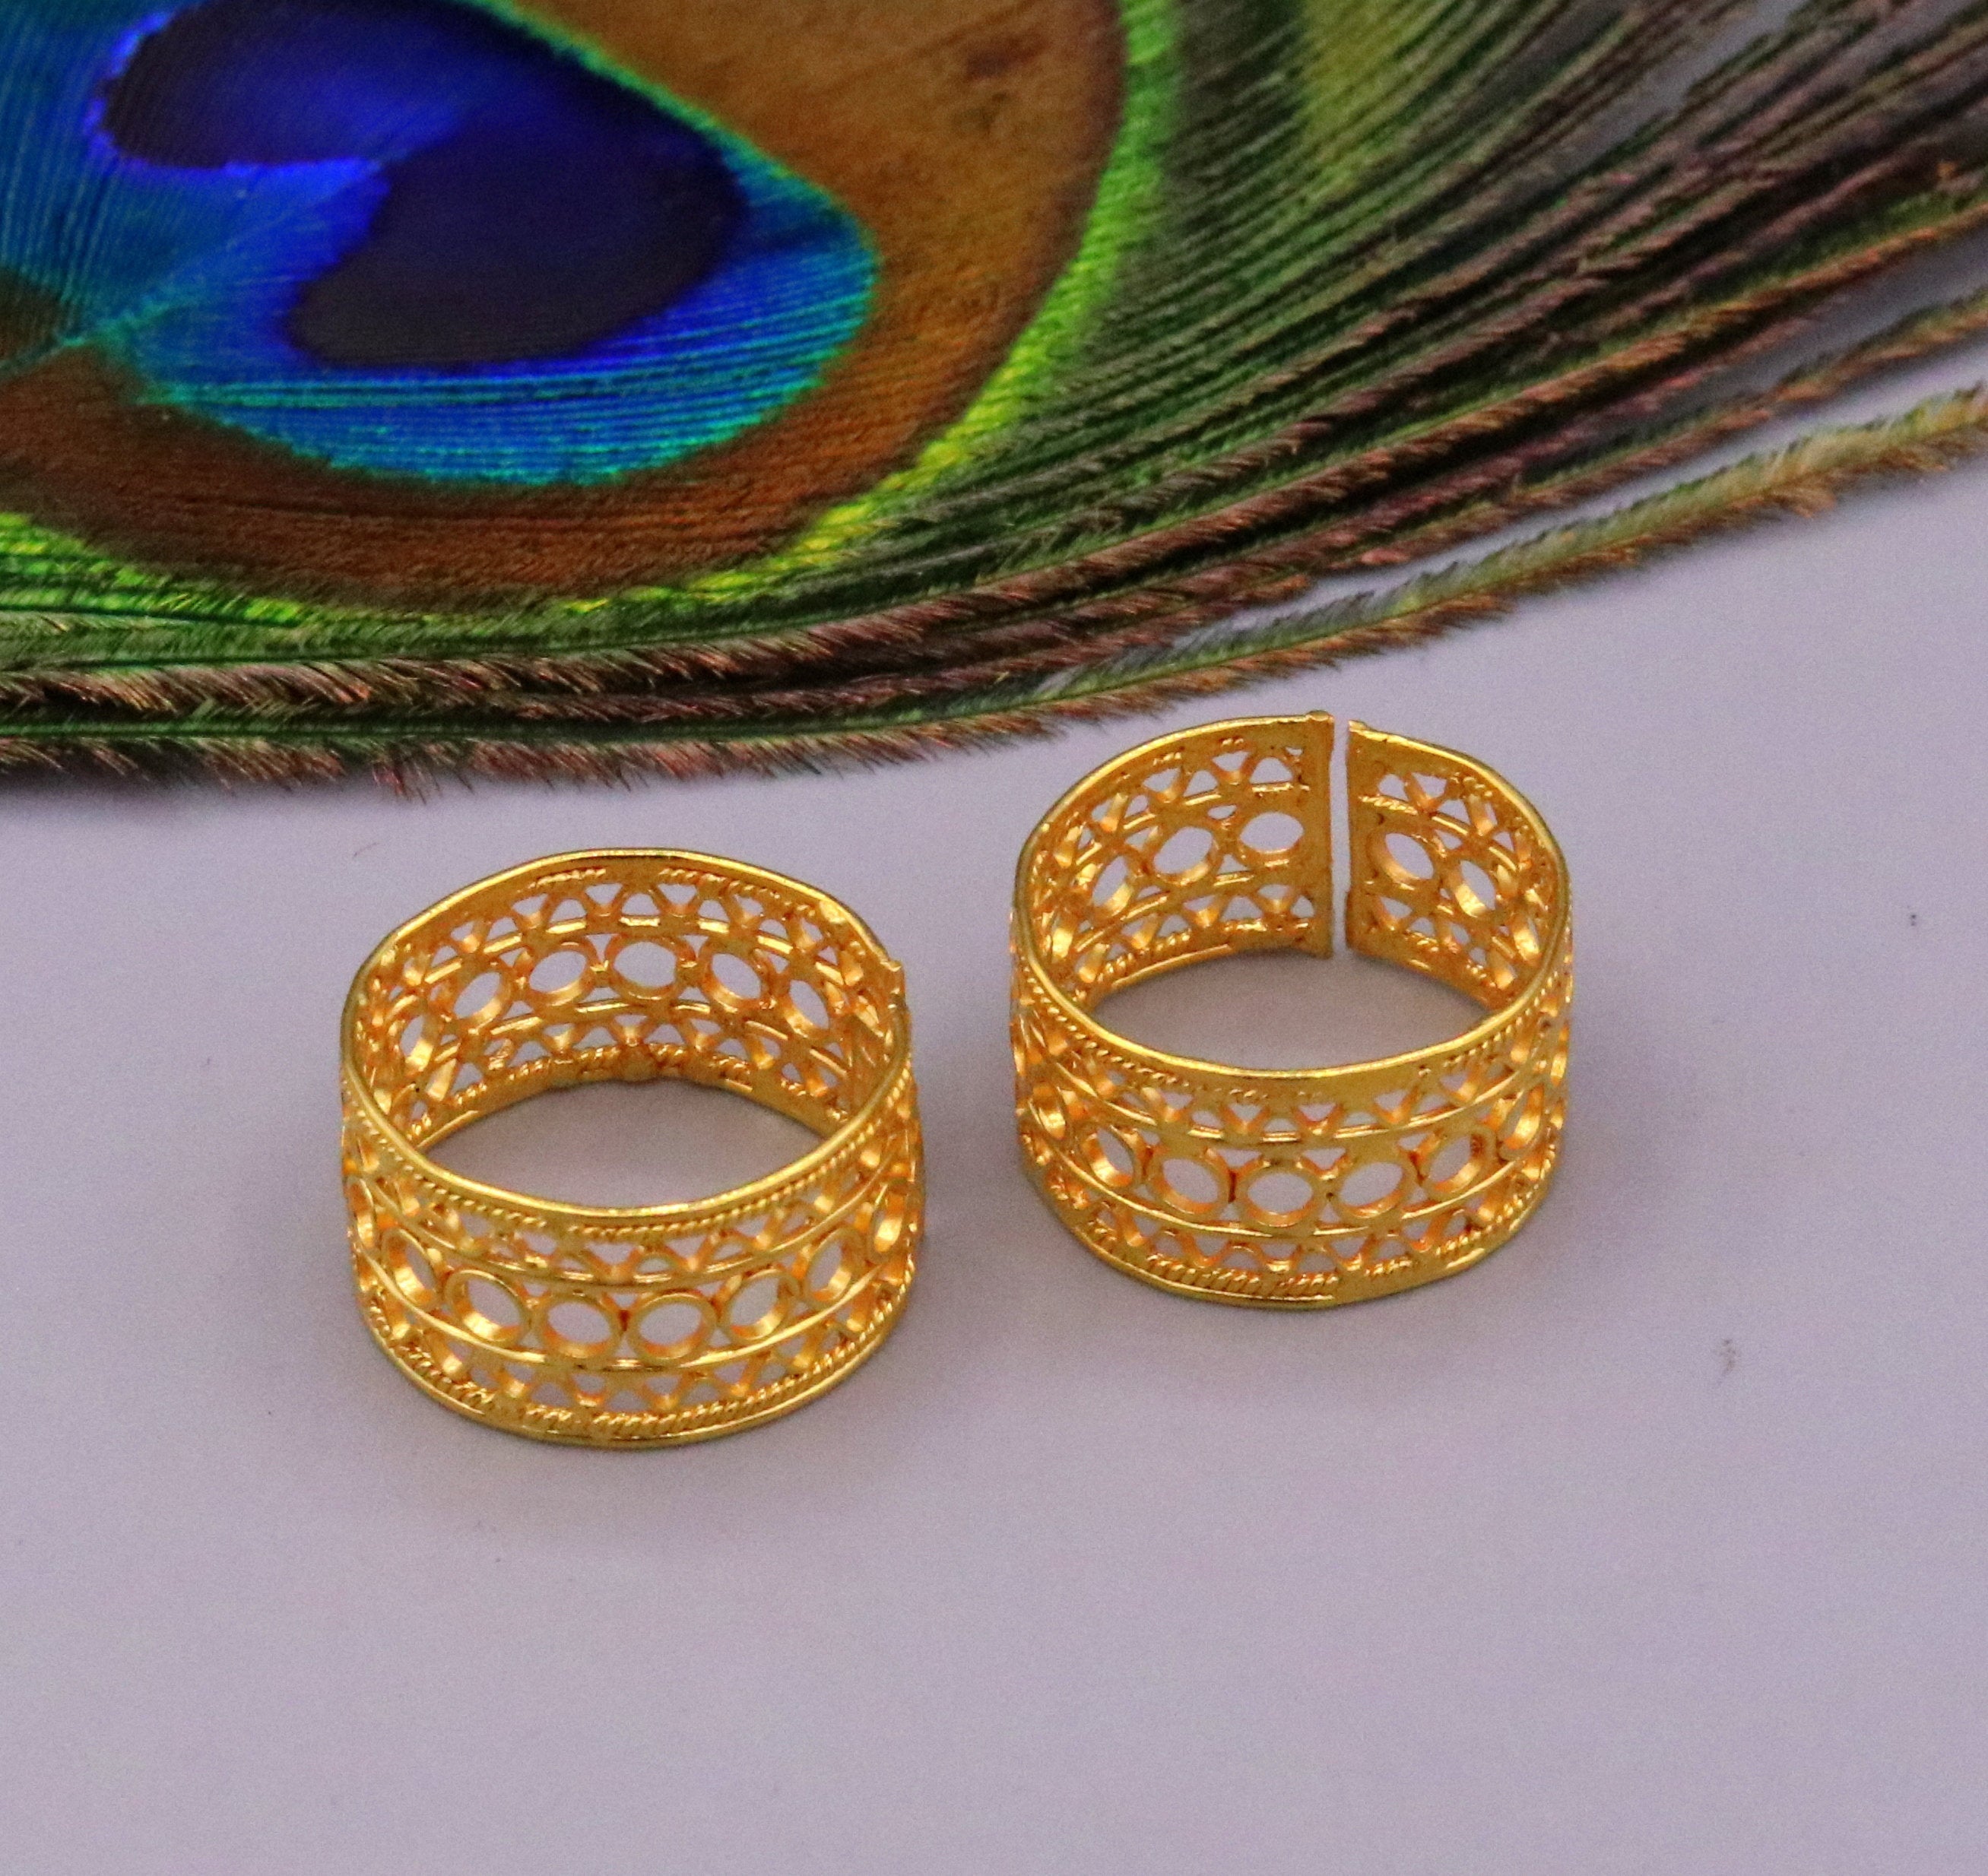 Gold Contemporary Toe Rings Online Shopping for Women at Low Prices